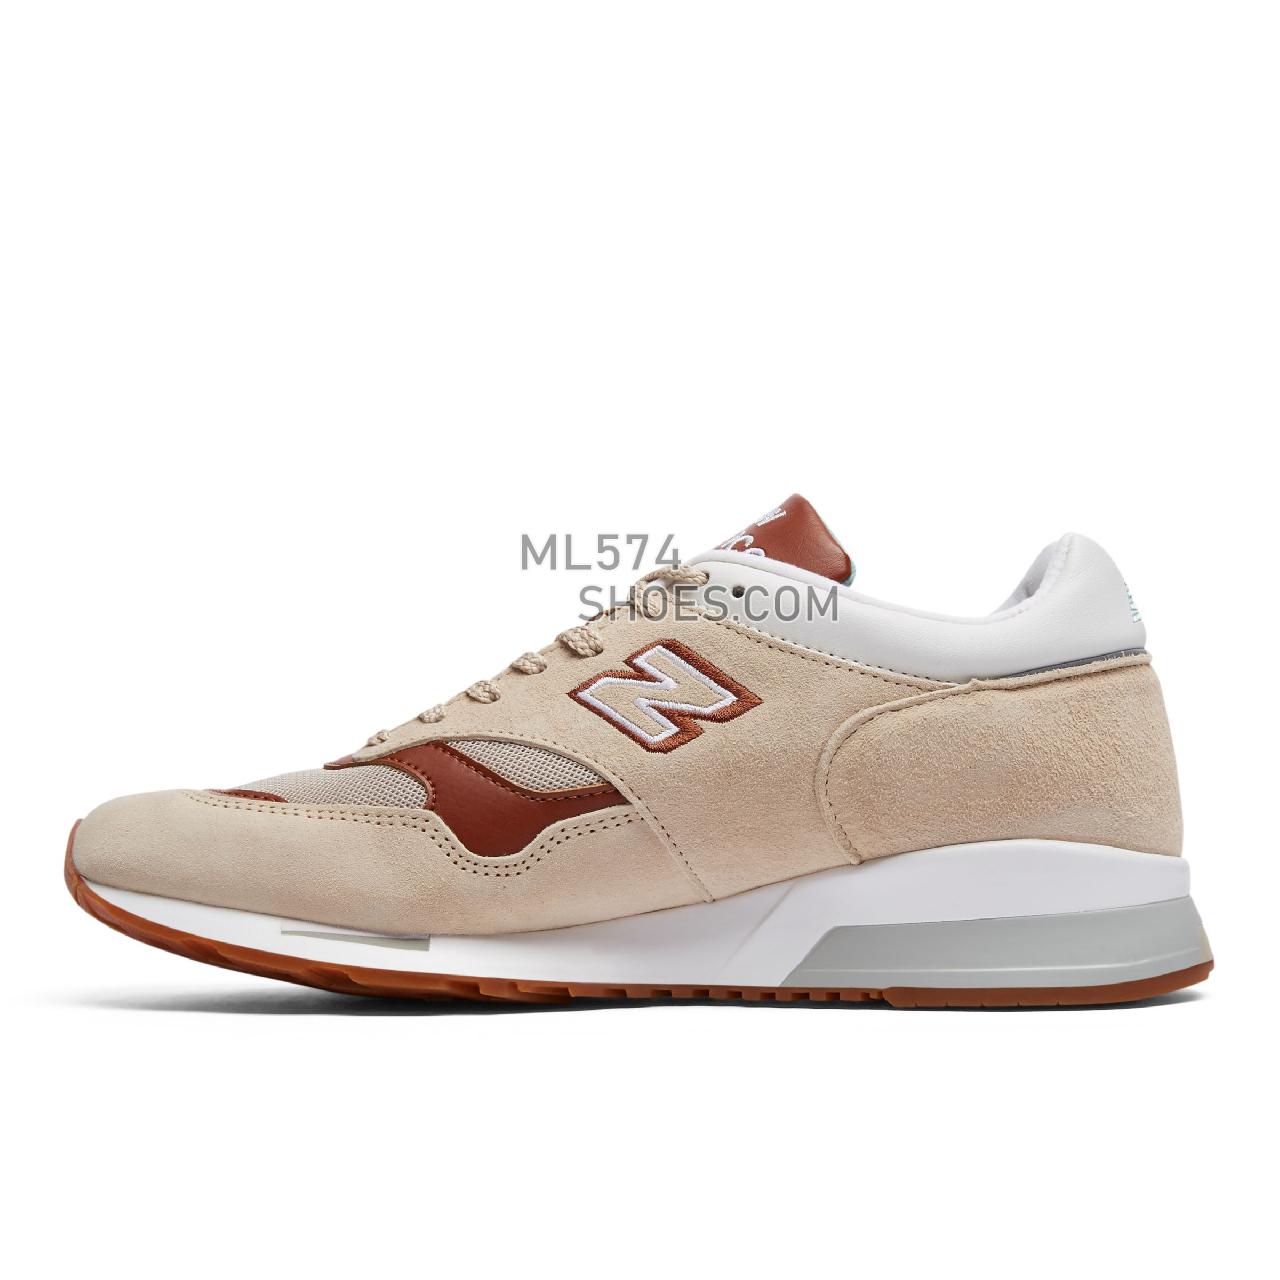 New Balance MADE UK 1500 - Men's Made in USA And UK Sneakers - Oatmeal with Brown - M1500STT